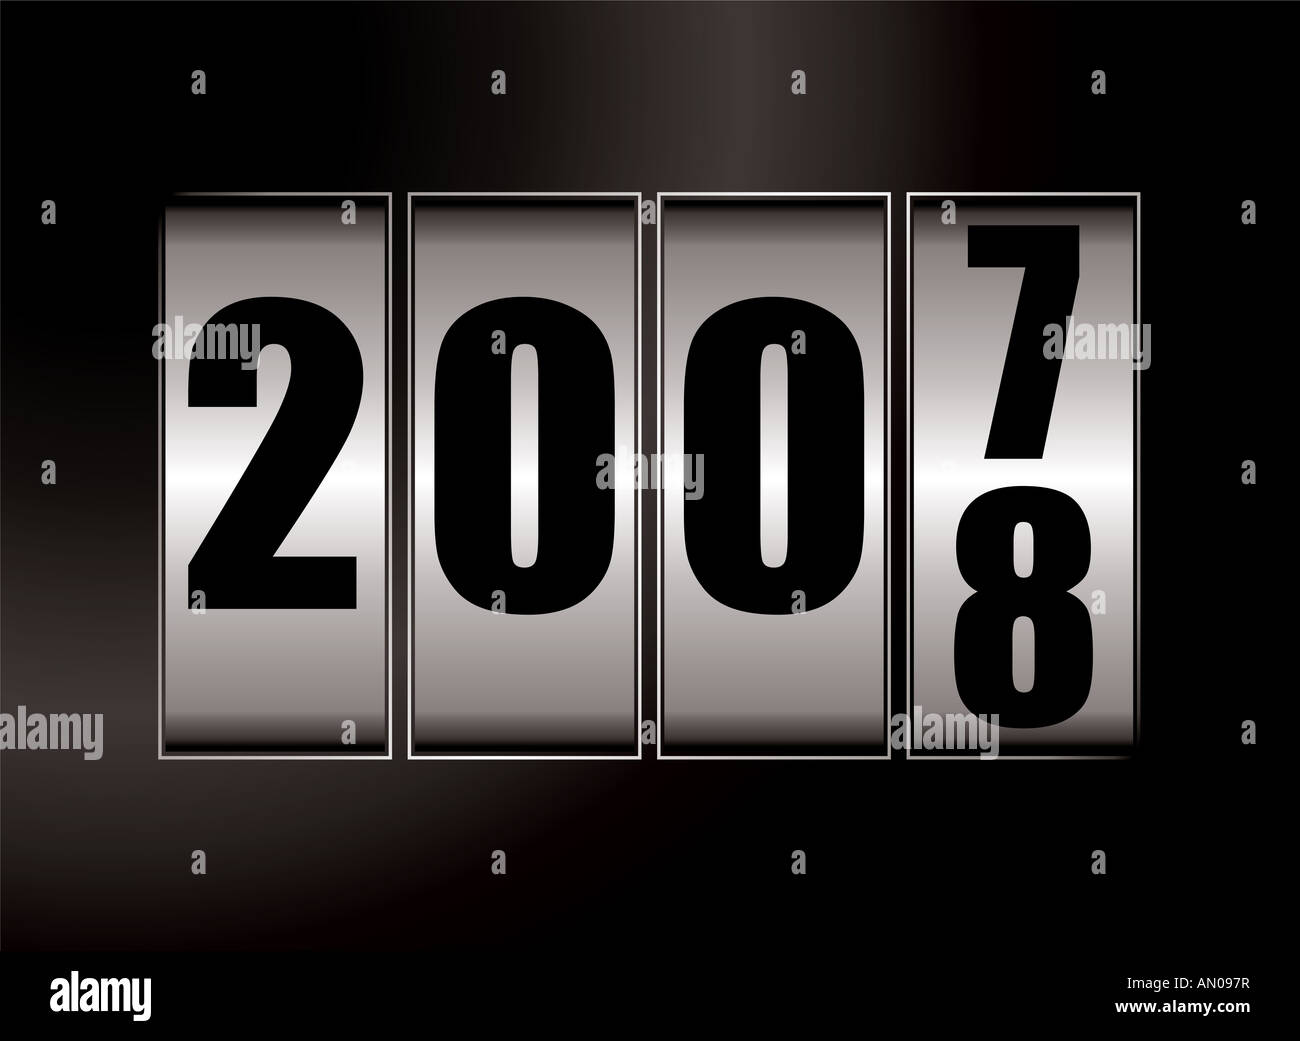 New year illustration for 2008 with a dial effect Stock Photo